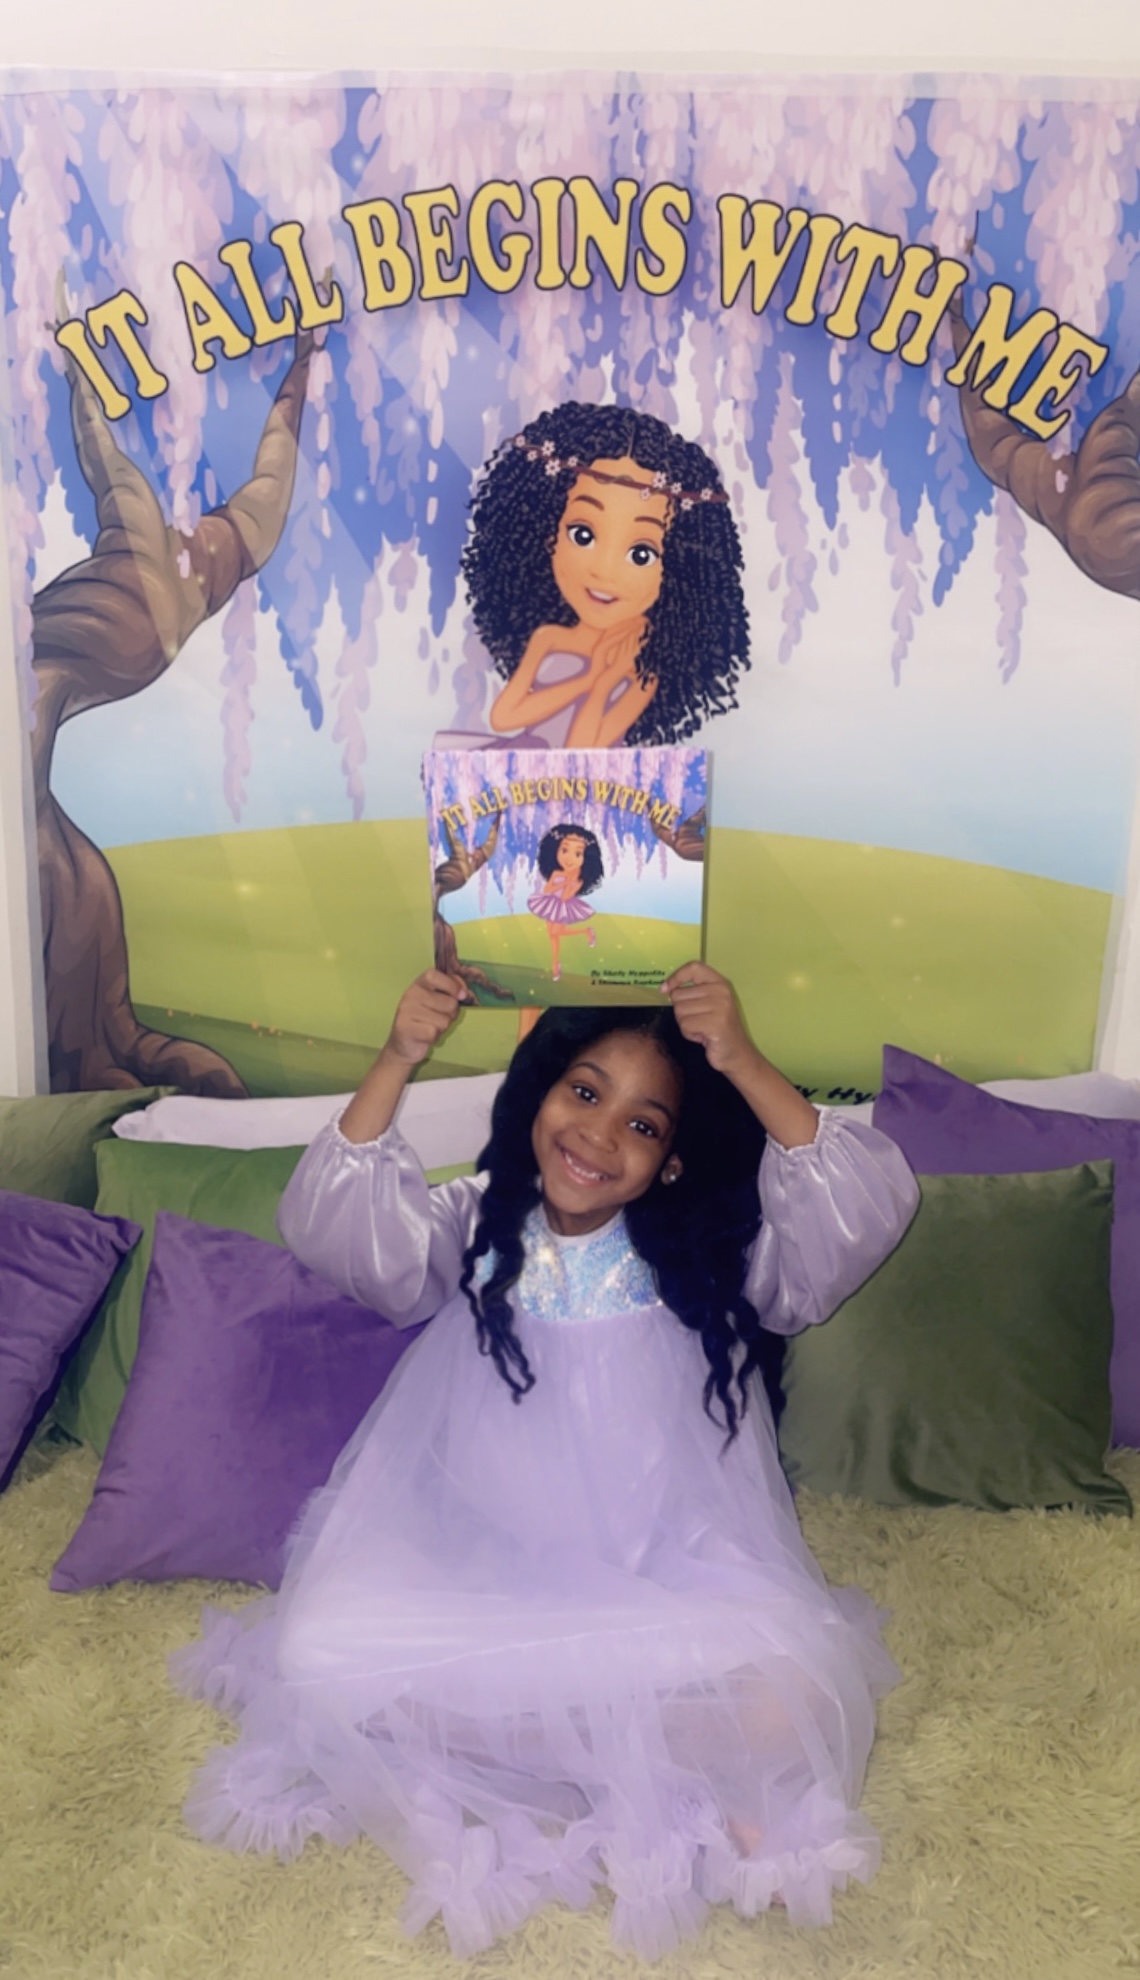 Shamaya Raphael, an Inspiring 6-Year-Old Author, Releases "It All Begins With Me", Encouraging Self-Belief Among Kids